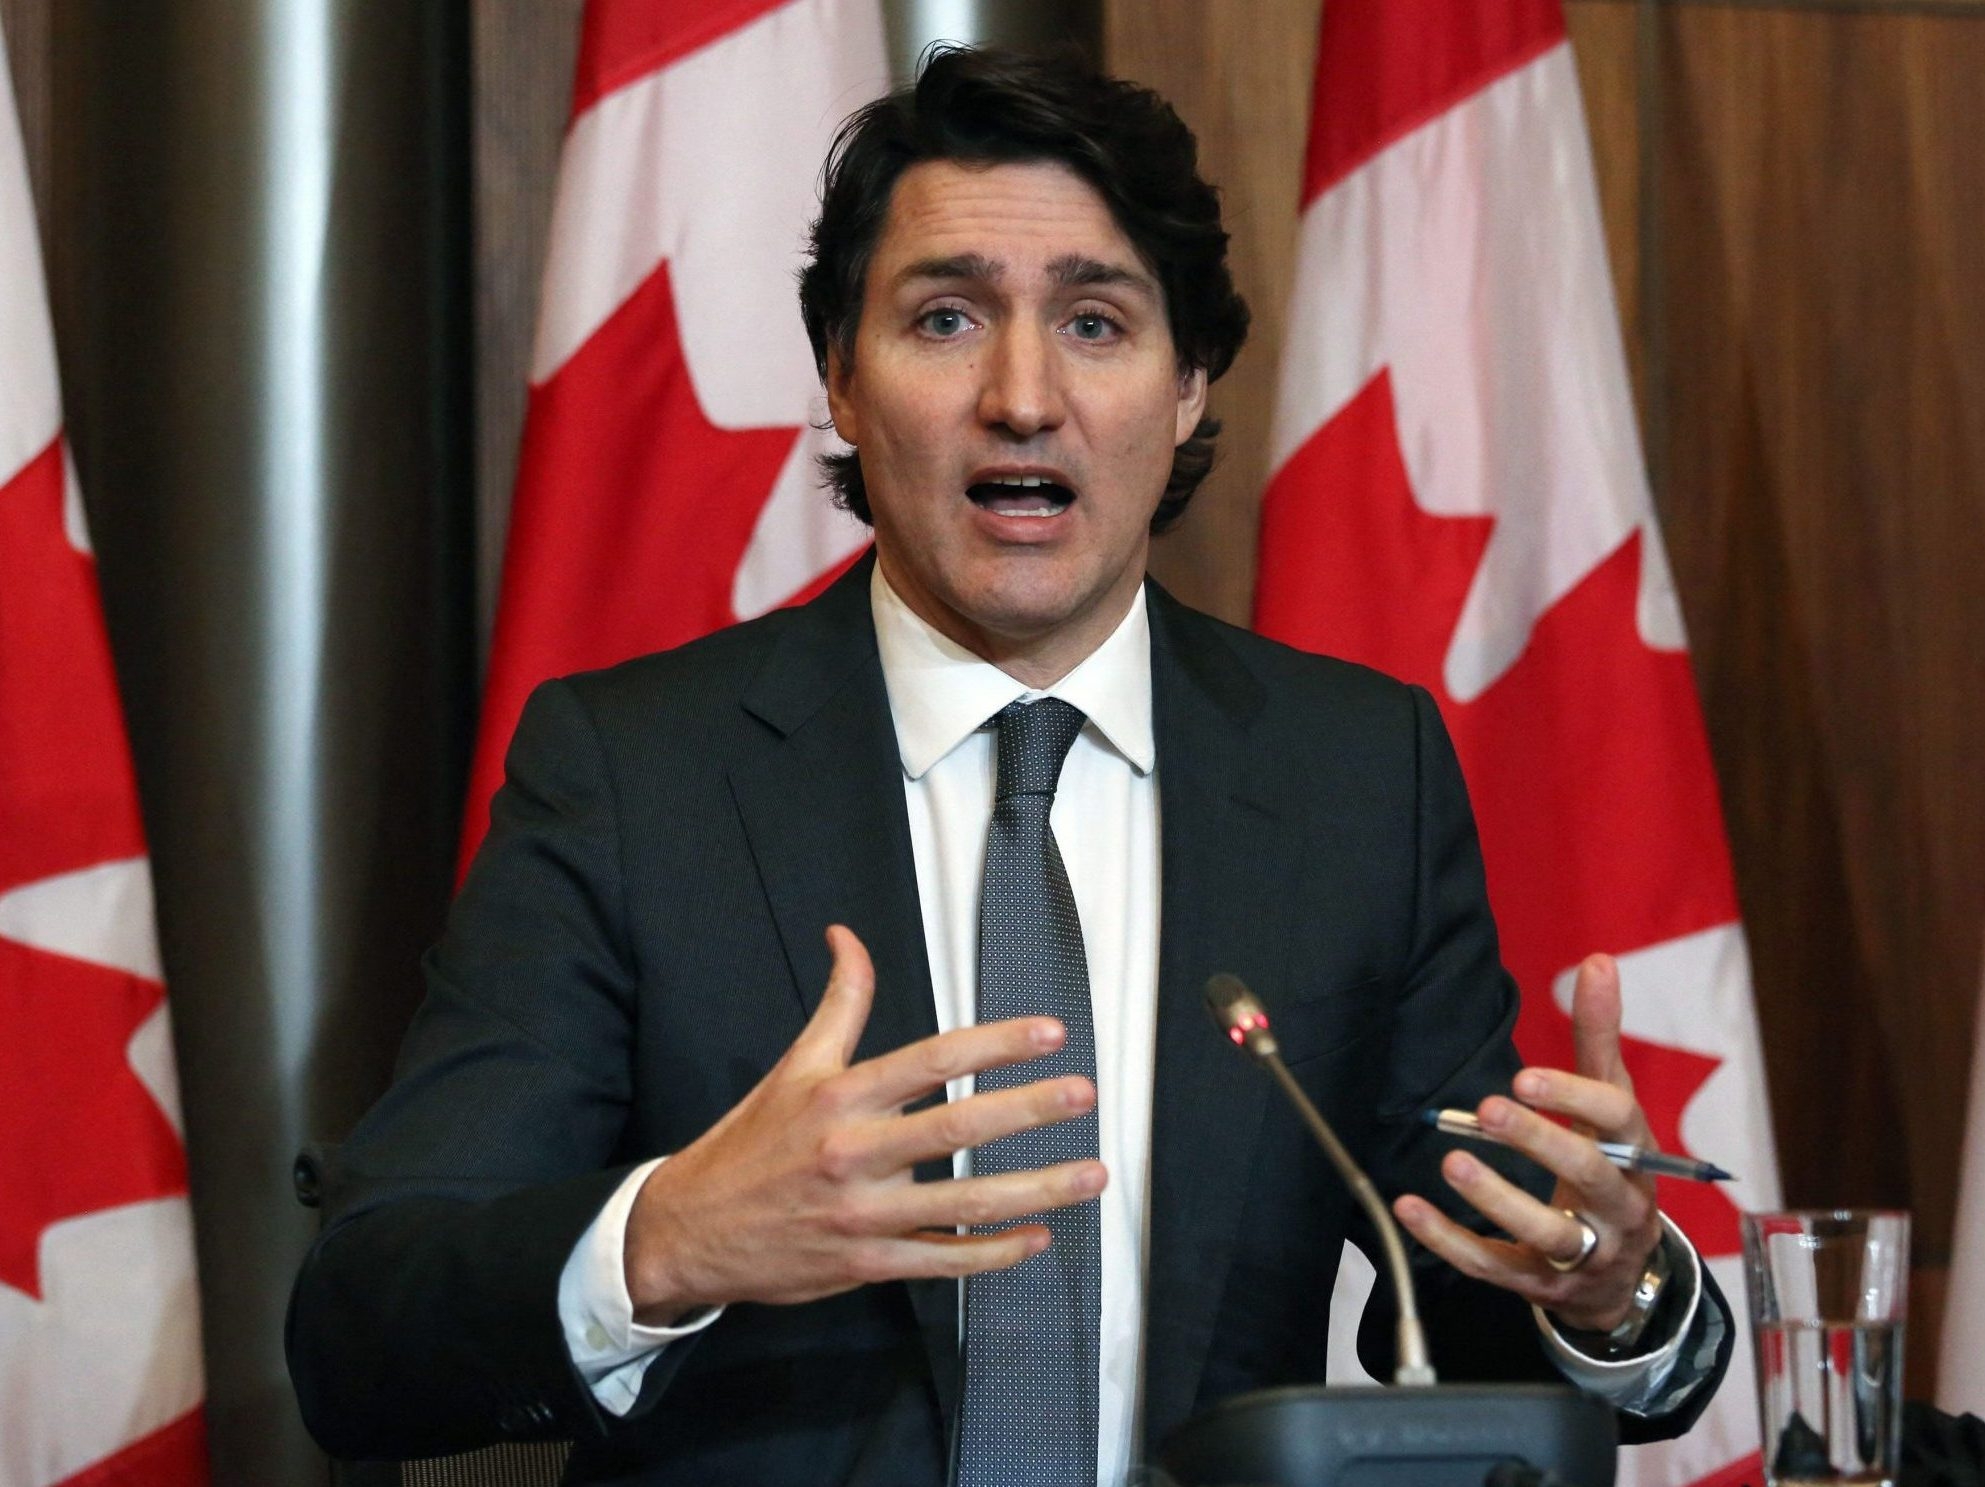 Prime Minister Justin Trudeau speaks at a news conference on the COVID-19 situation, January 12, 2022, in Ottawa.